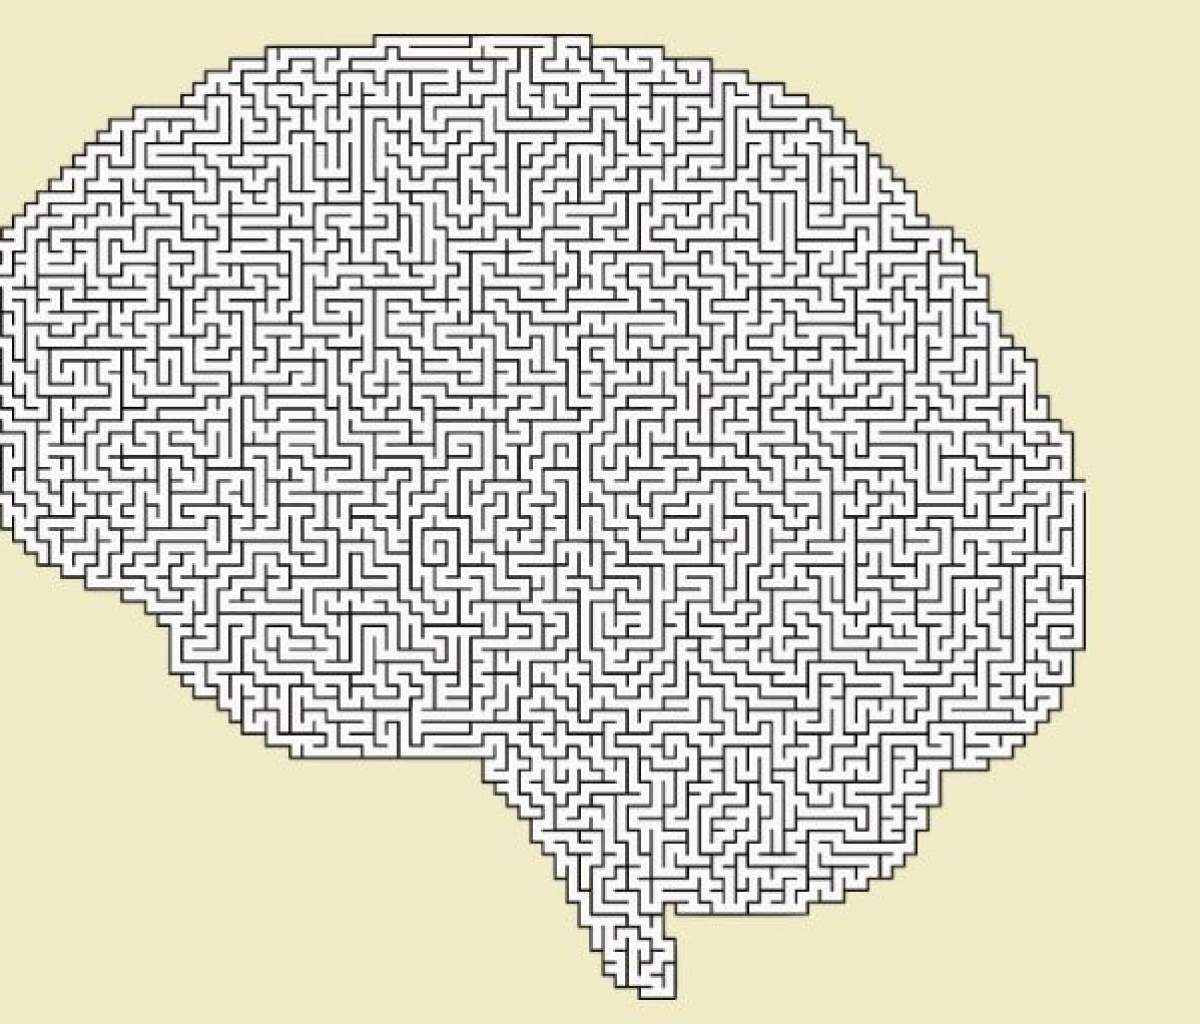 picture of brain with mazes